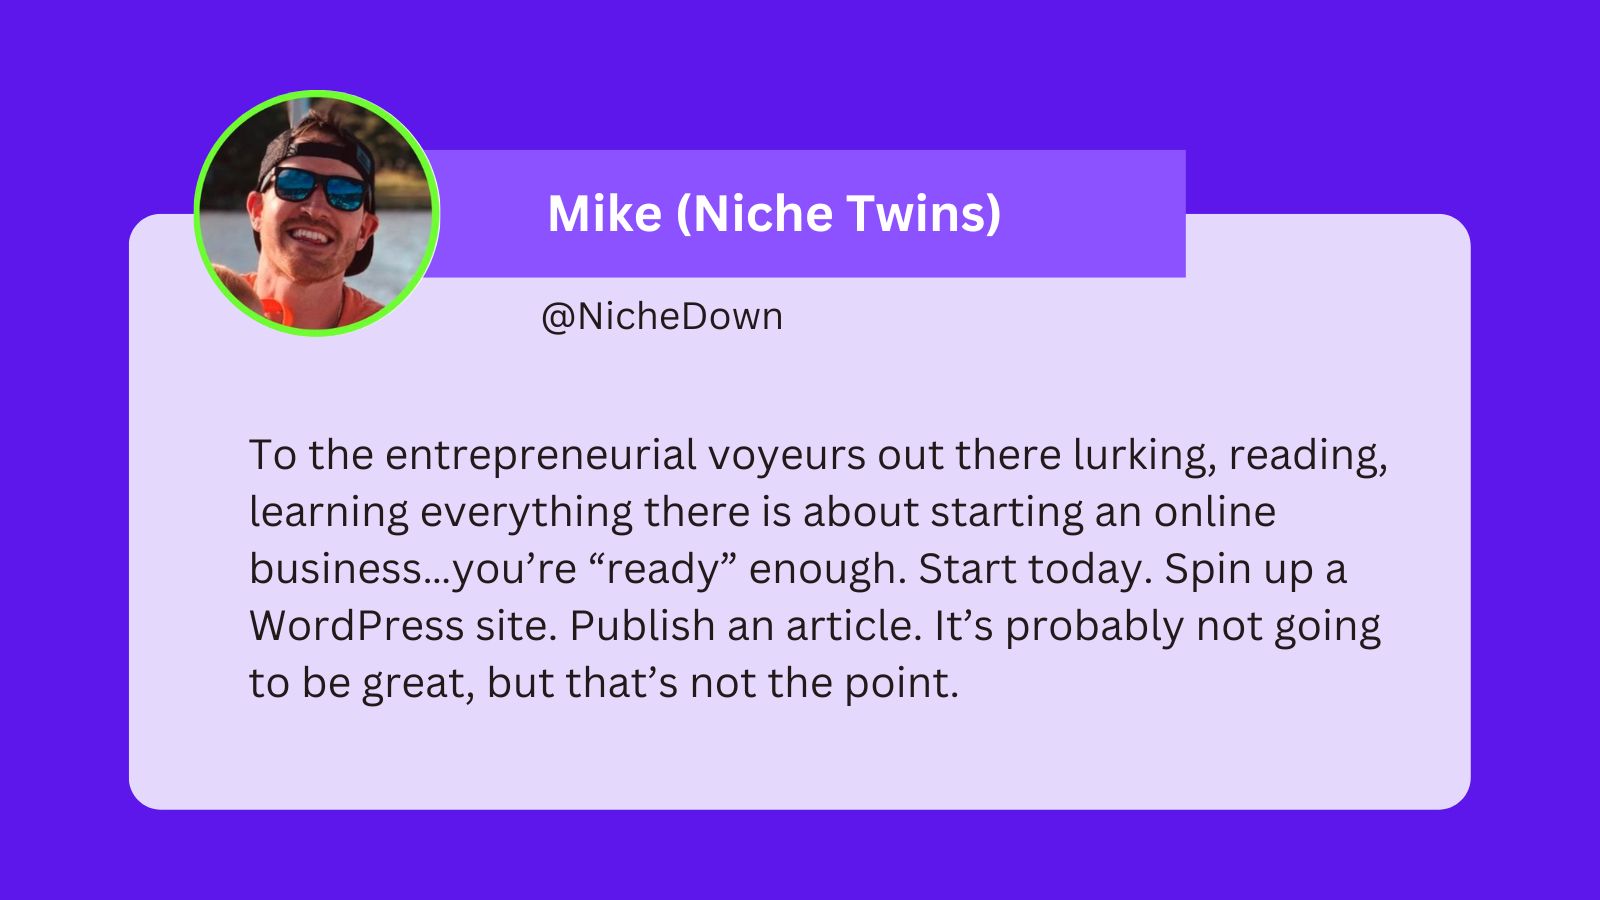 A tweet from Mike from Niche Twins that says: To the entrepreneurial voyeurs out there lurking, reading, learning everything there is about starting an online business…you’re “ready” enough. Start today. Spin up a WordPress site. Publish an article. It’s probably not going to be great, but that’s not the point.